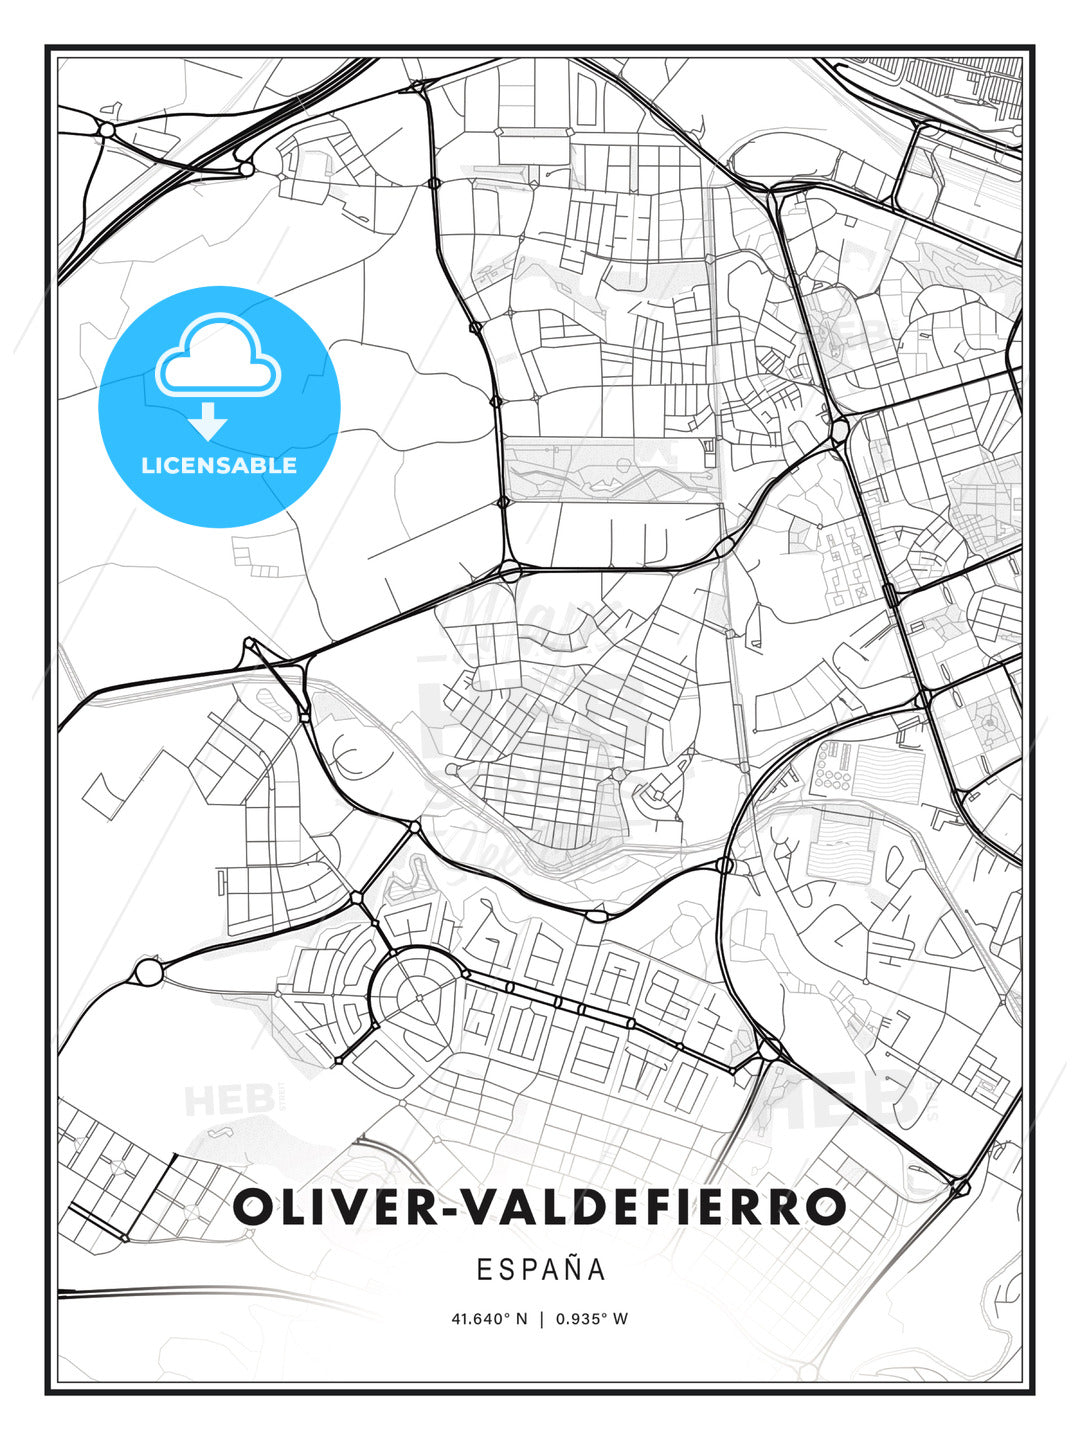 Oliver-Valdefierro, Spain, Modern Print Template in Various Formats - HEBSTREITS Sketches